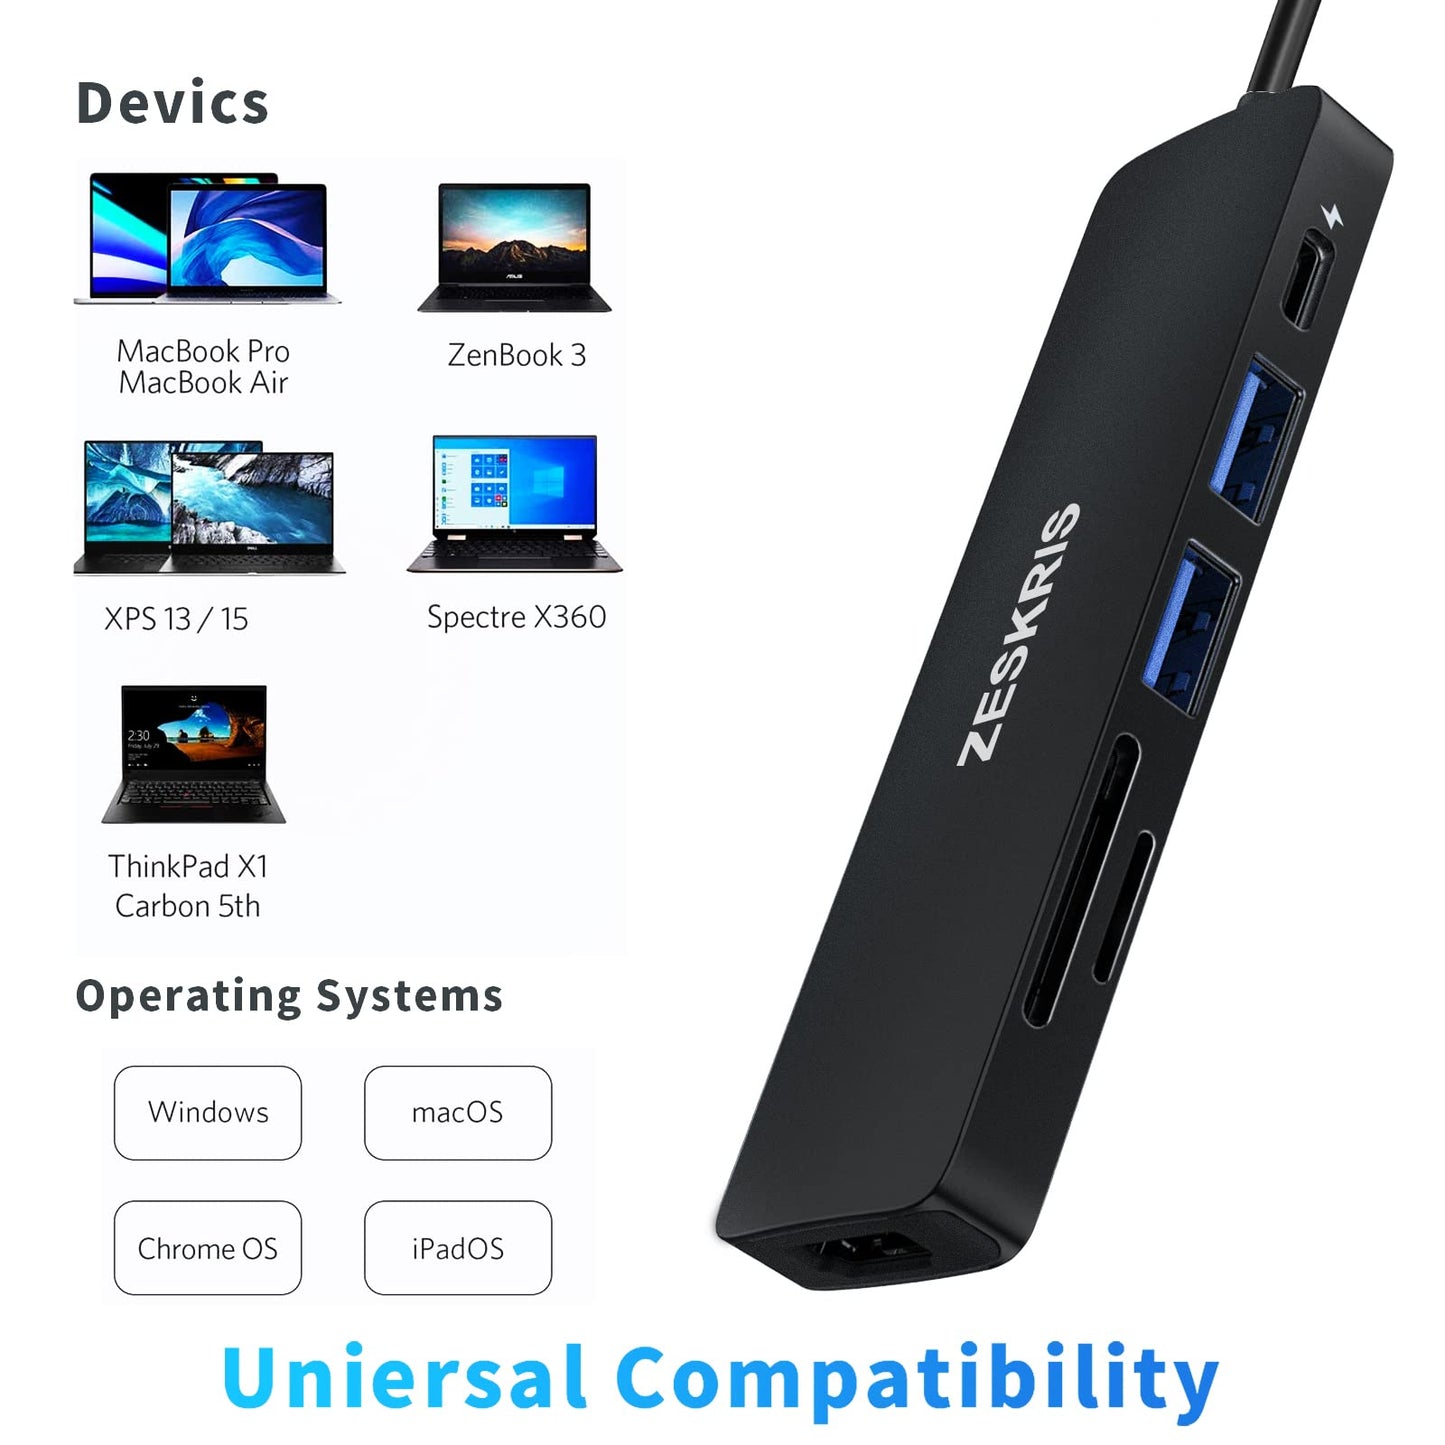 USB C Hub, ZESKRIS 5 Ports Ultra Slim Data Type C Hub with 1 USB 3.0, 2 USB 2.0, TF/SD/MicroSD Card Reader Portable USB Splitter for Macbook Pro/Air, Laptop, PS5/PS4, and Other Type C Devices